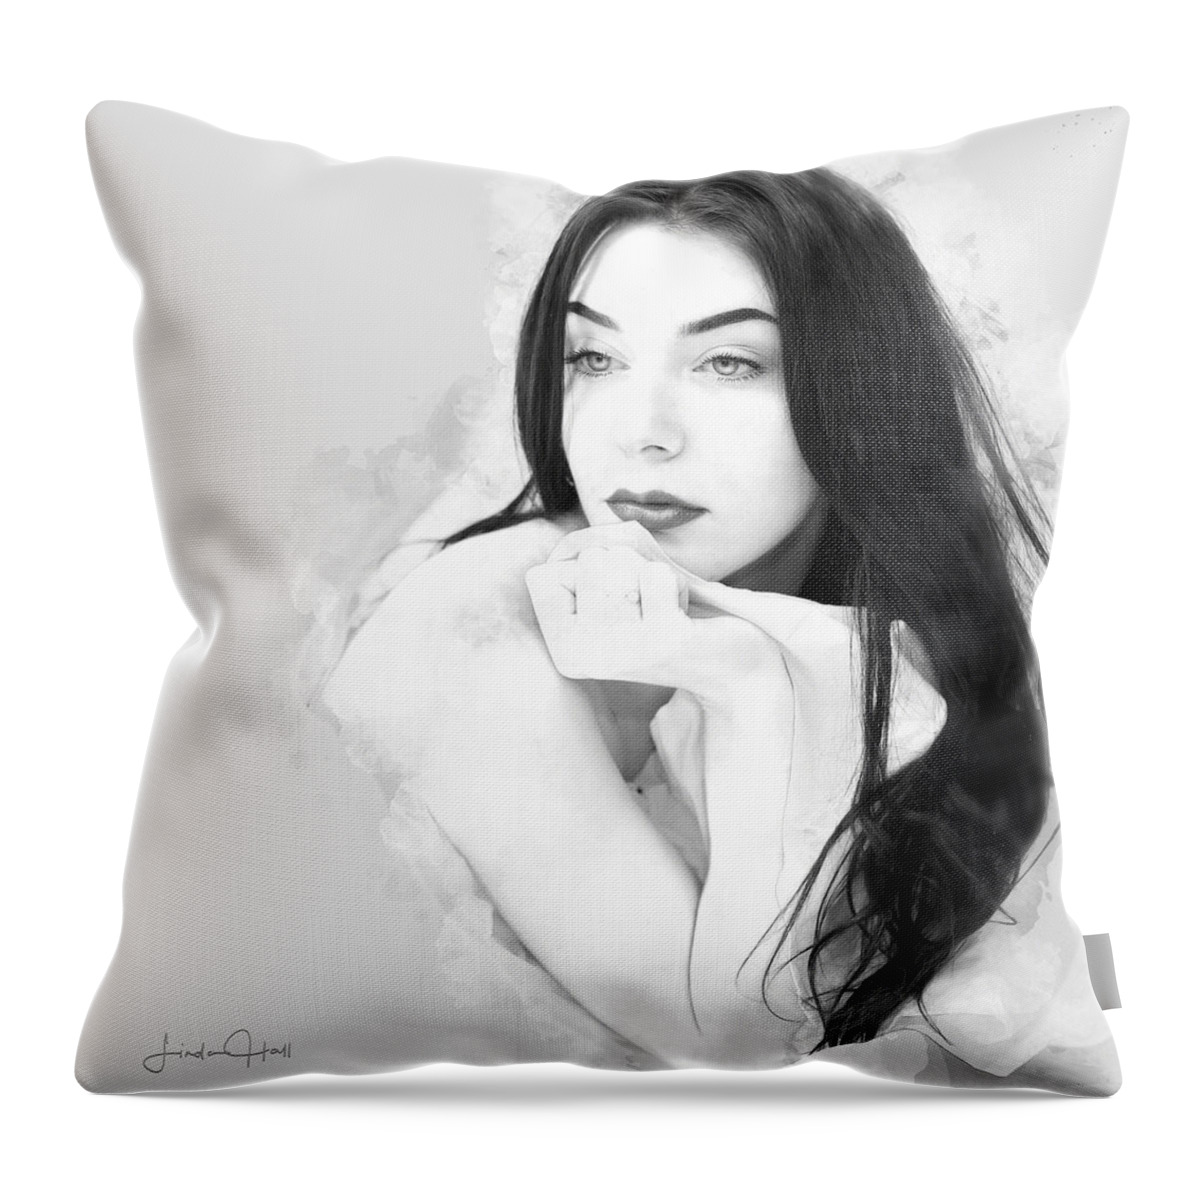 Beautiful Woman Throw Pillow featuring the digital art Daydreamer by Linda Lee Hall